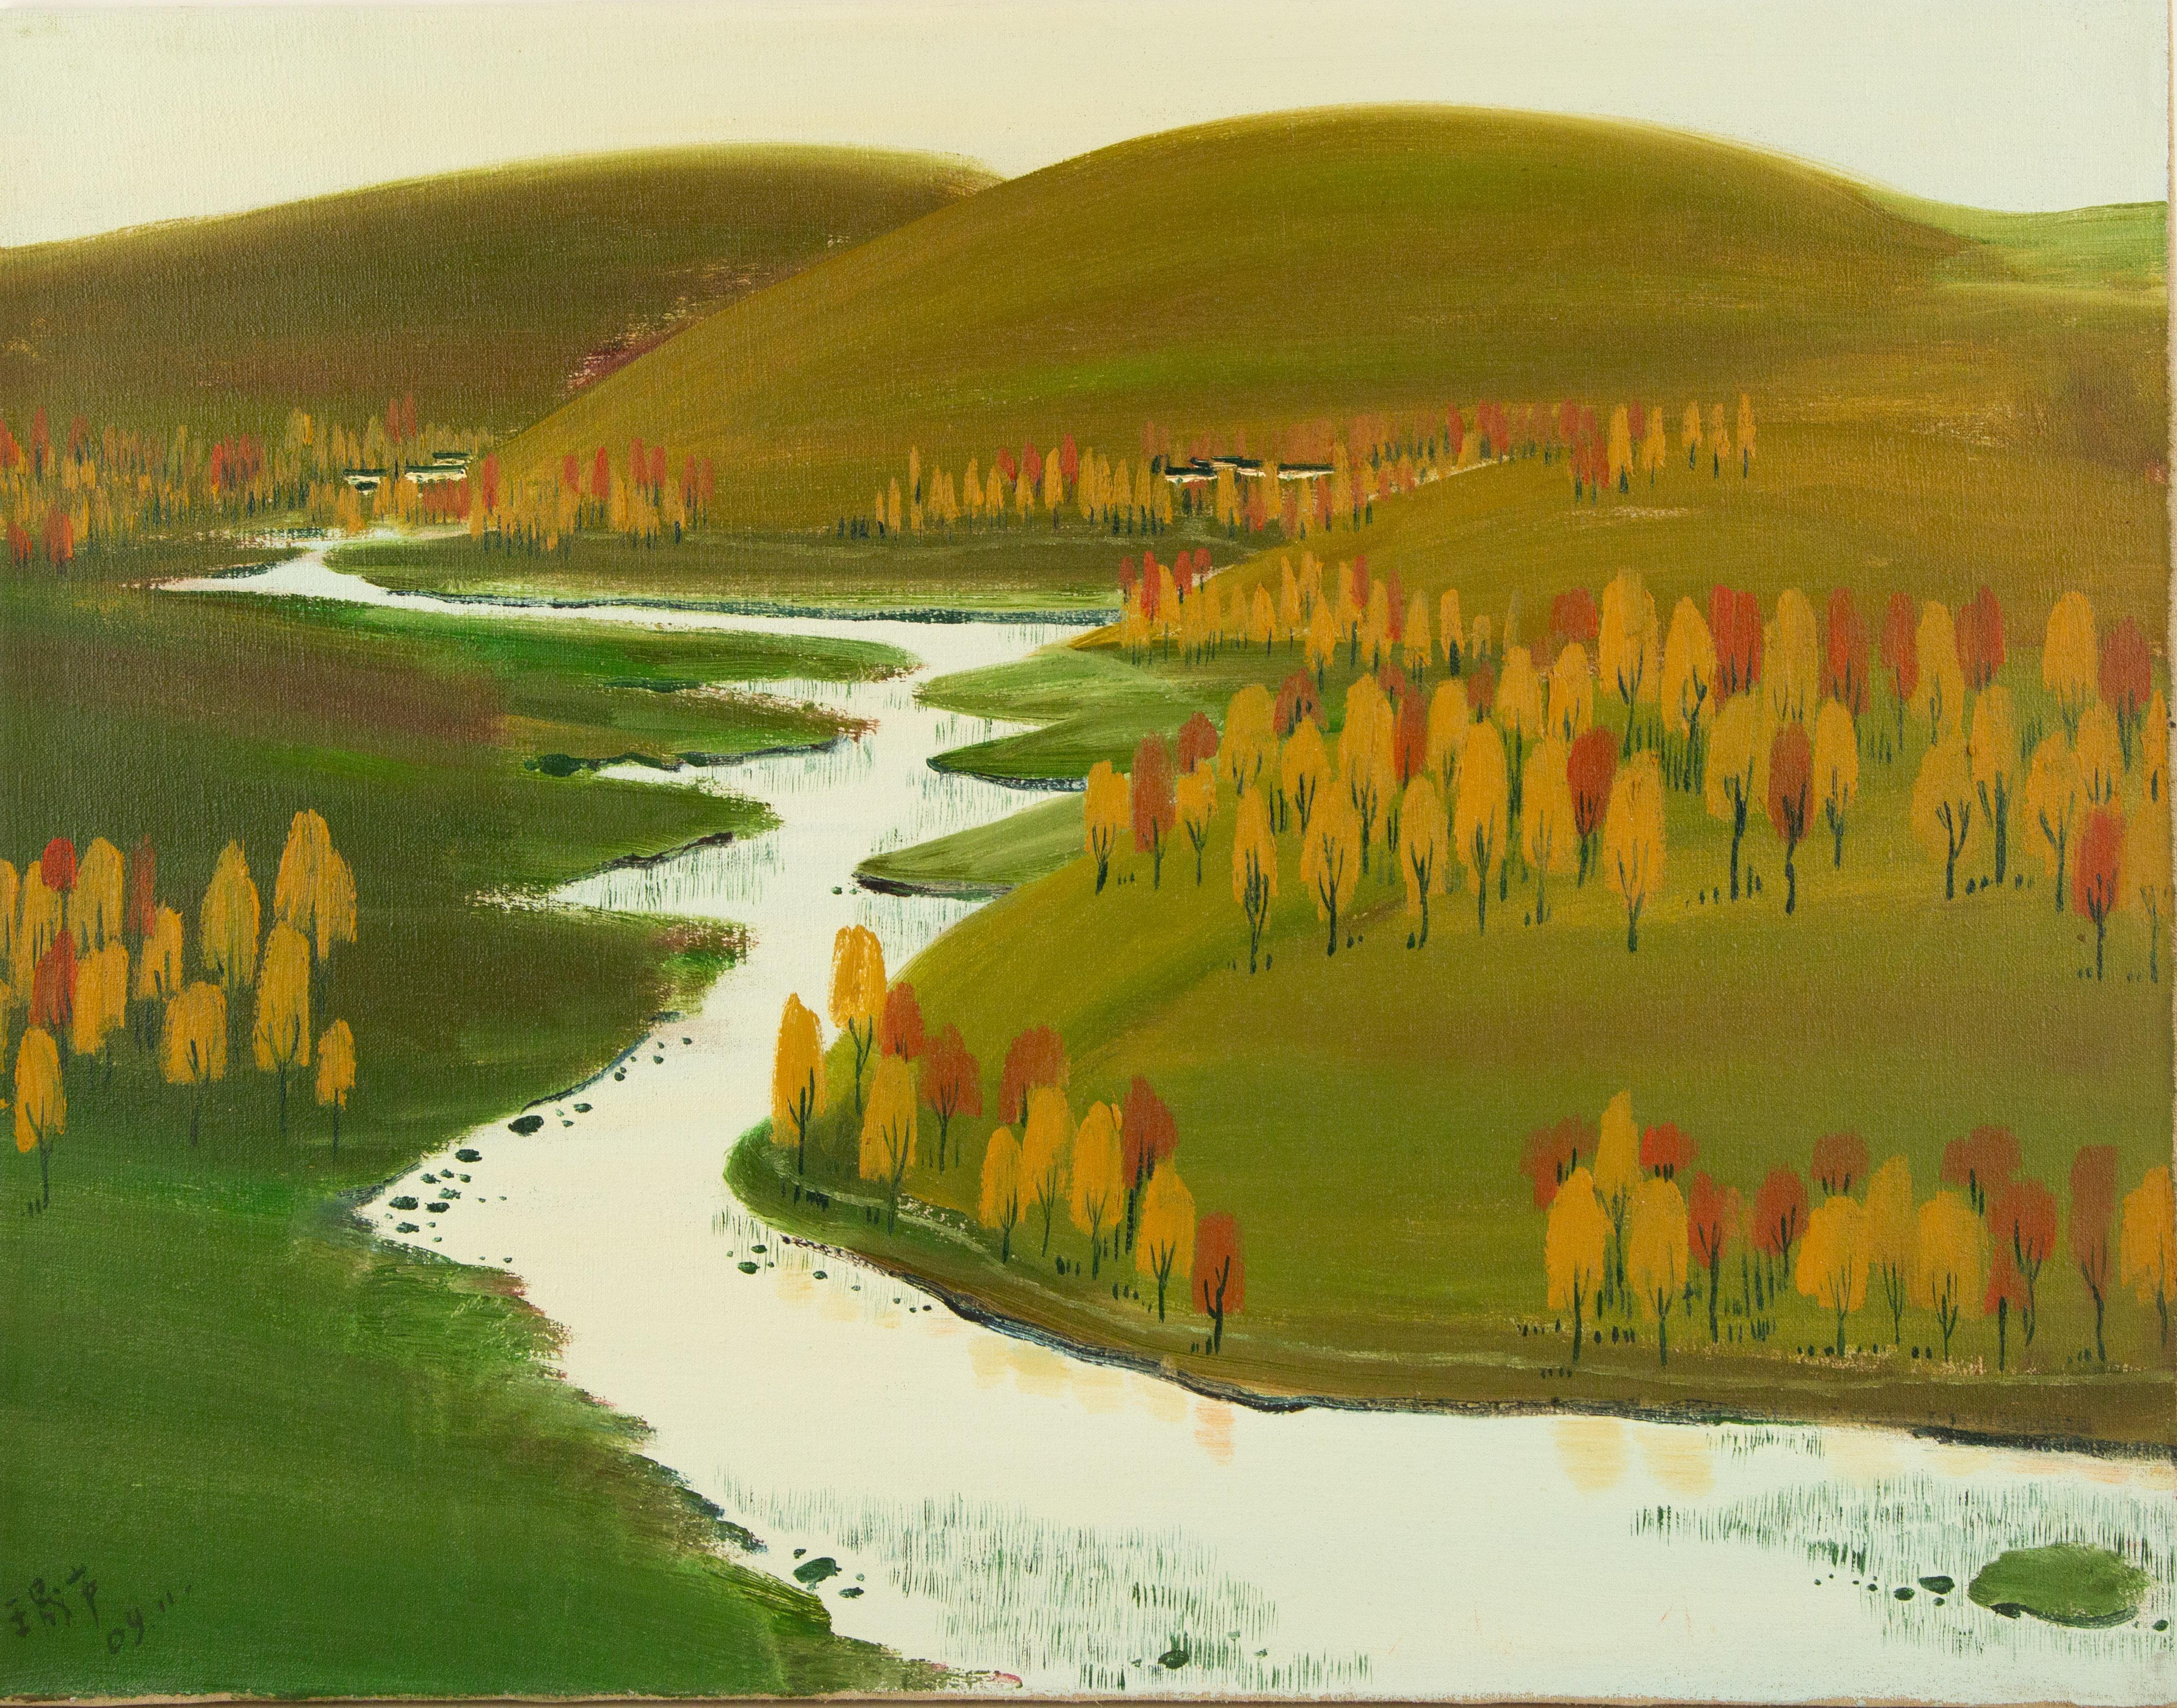  Title: Autumn Ambiance
 Medium: Oil on canvas
 Size: 21.5 x 27 inches
 Frame: Framing options available!
 Condition: The painting appears to be in excellent condition.
 
 Year: 2004.11
 Artist: Shenglu Wang
 Signature: Signed
 Signature Location: